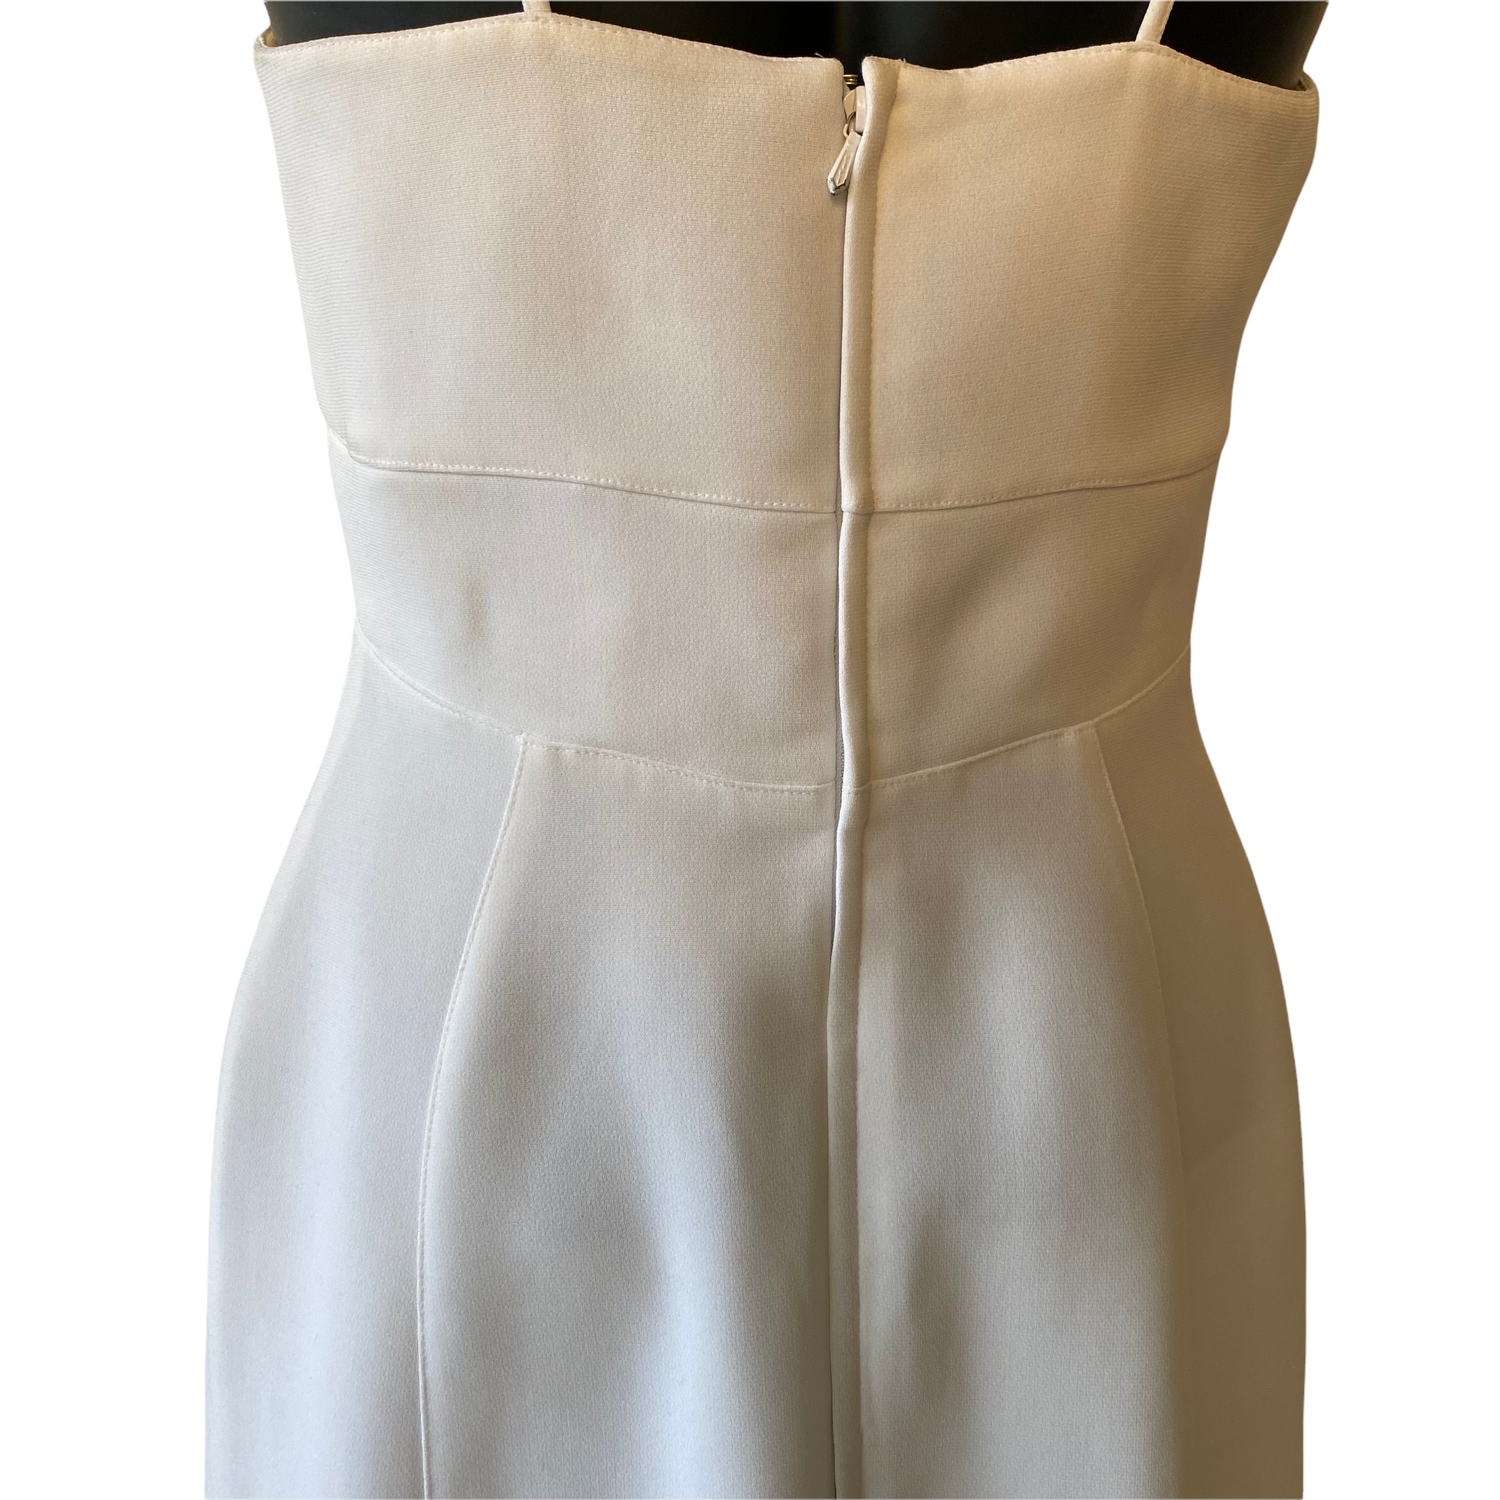 Thierry Mugler white vintage dress with straps - S - 1990s